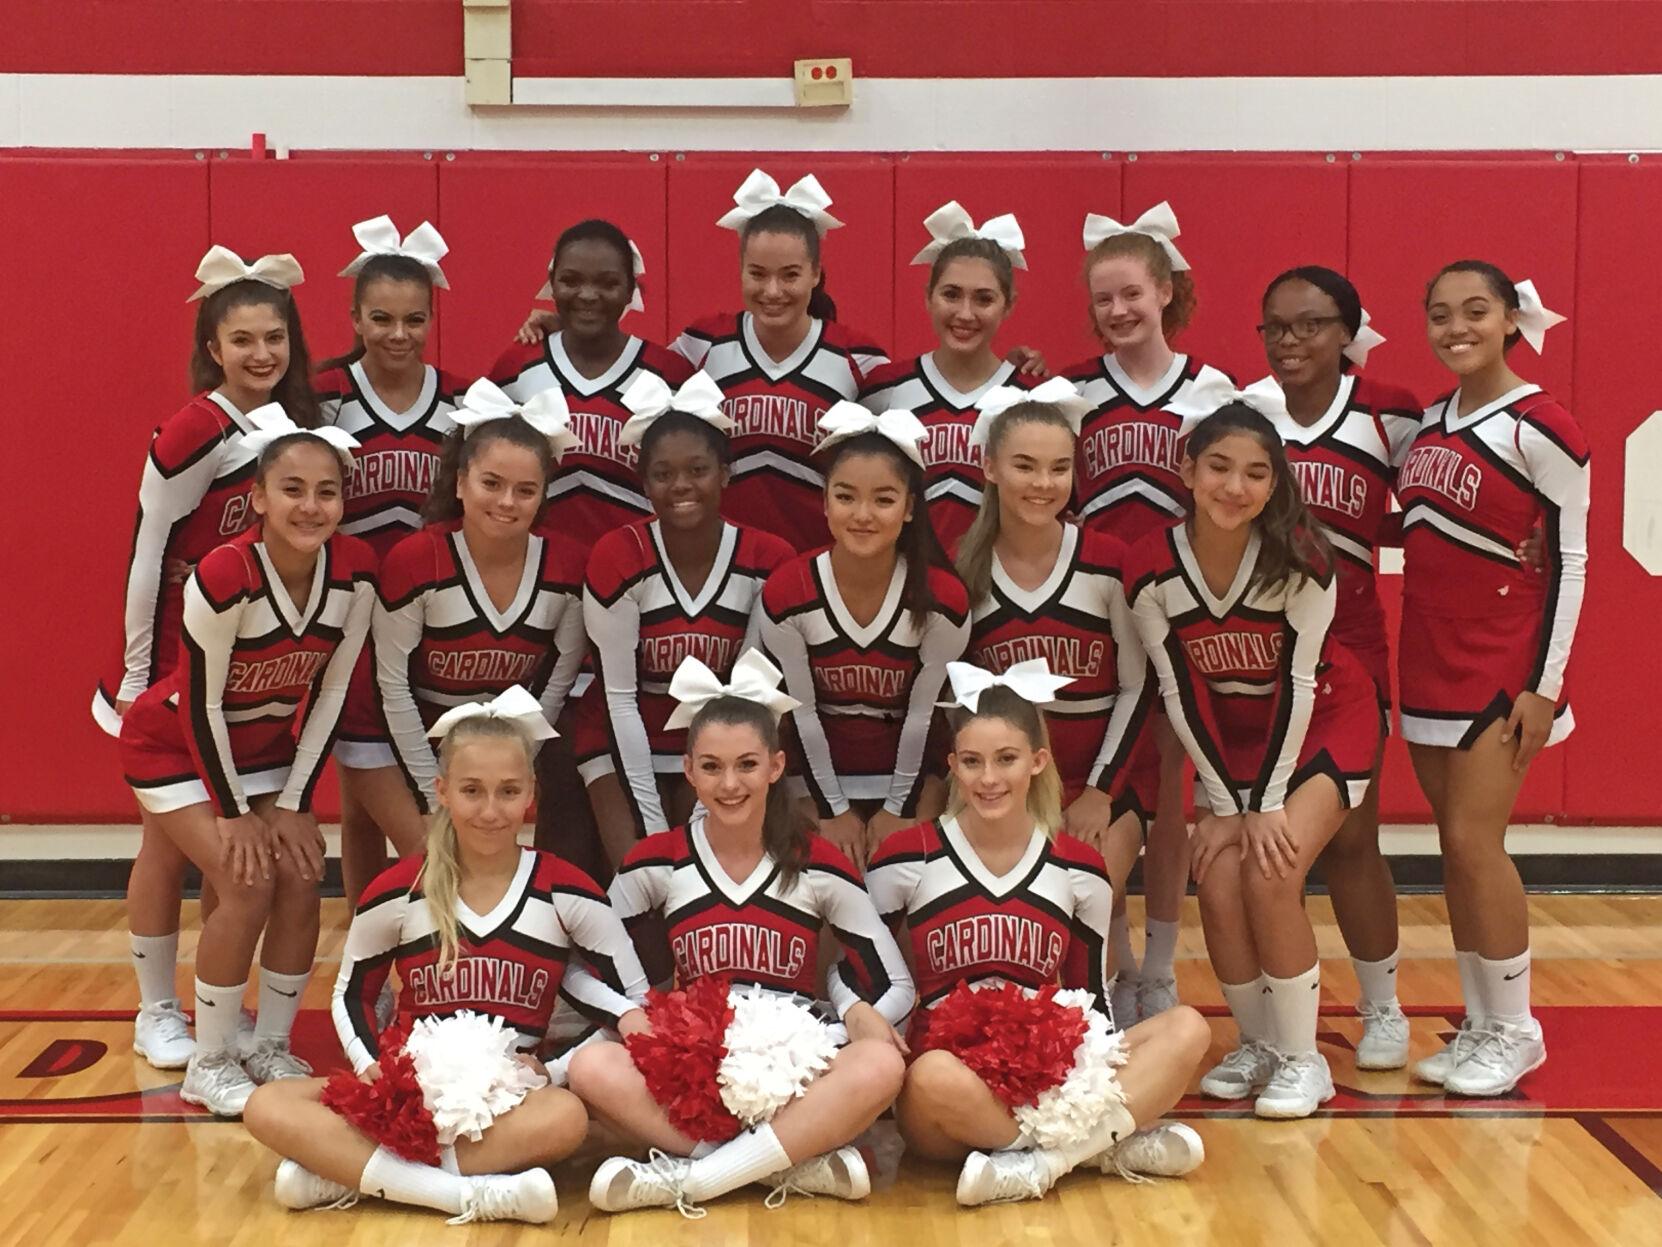 Lawrence cheer squad wins regionals, top spots in other competitions